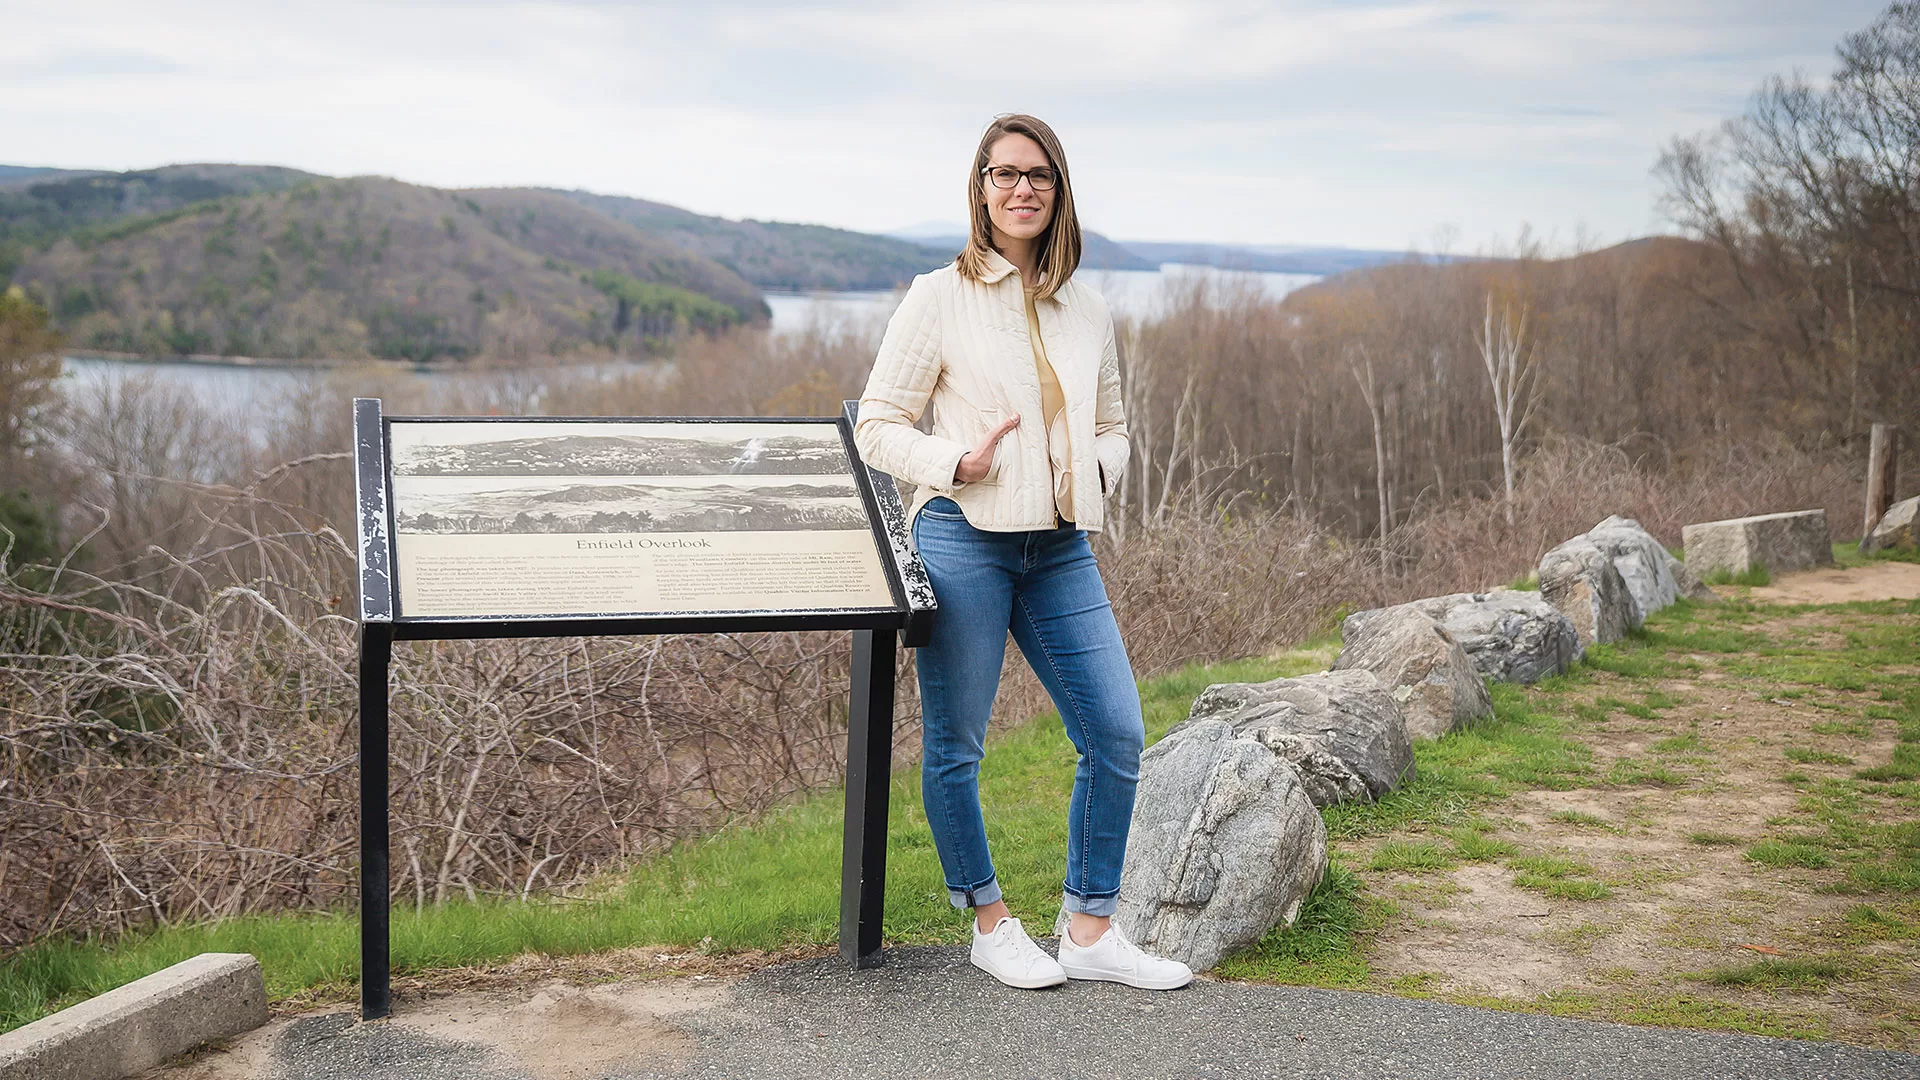 Elena Palladino wants everyone who visits the Quabbin — or ever drinks its water — to contemplate the loss and sacrifice involved in its creation.